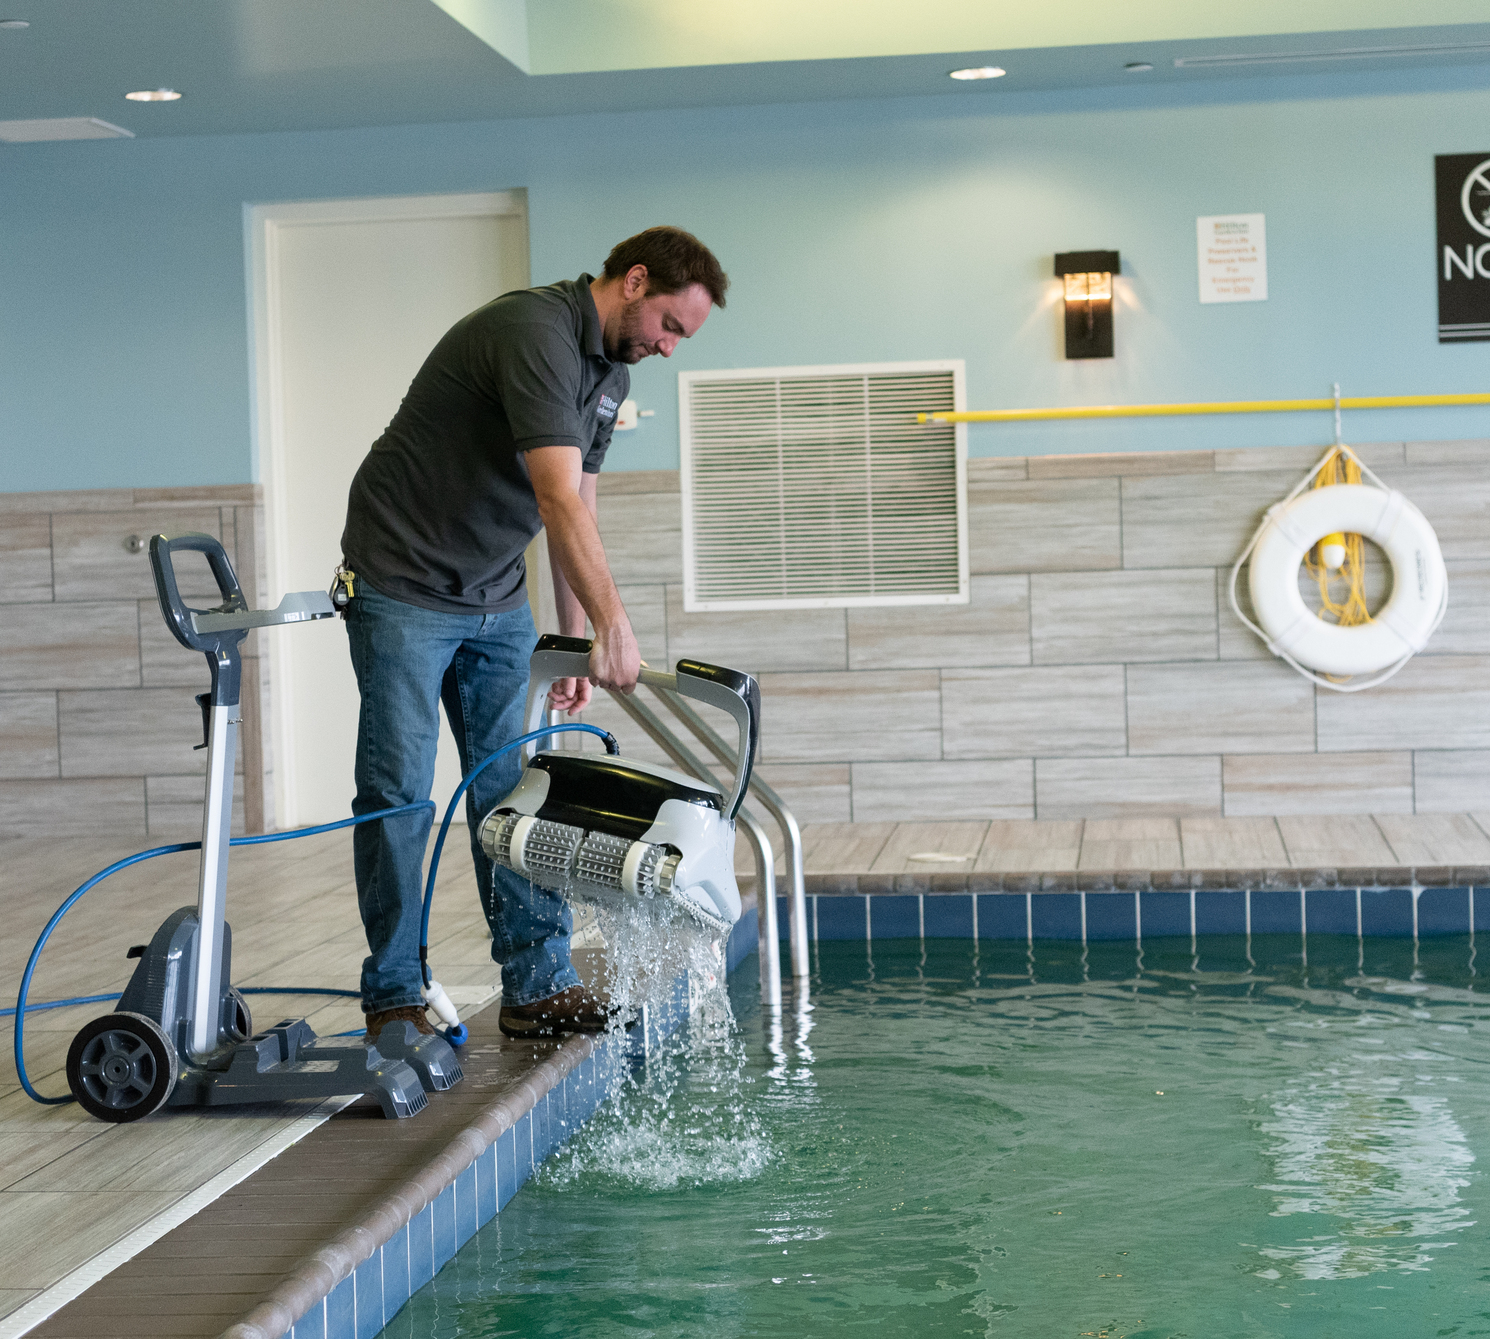 Pool Cleaning Robot